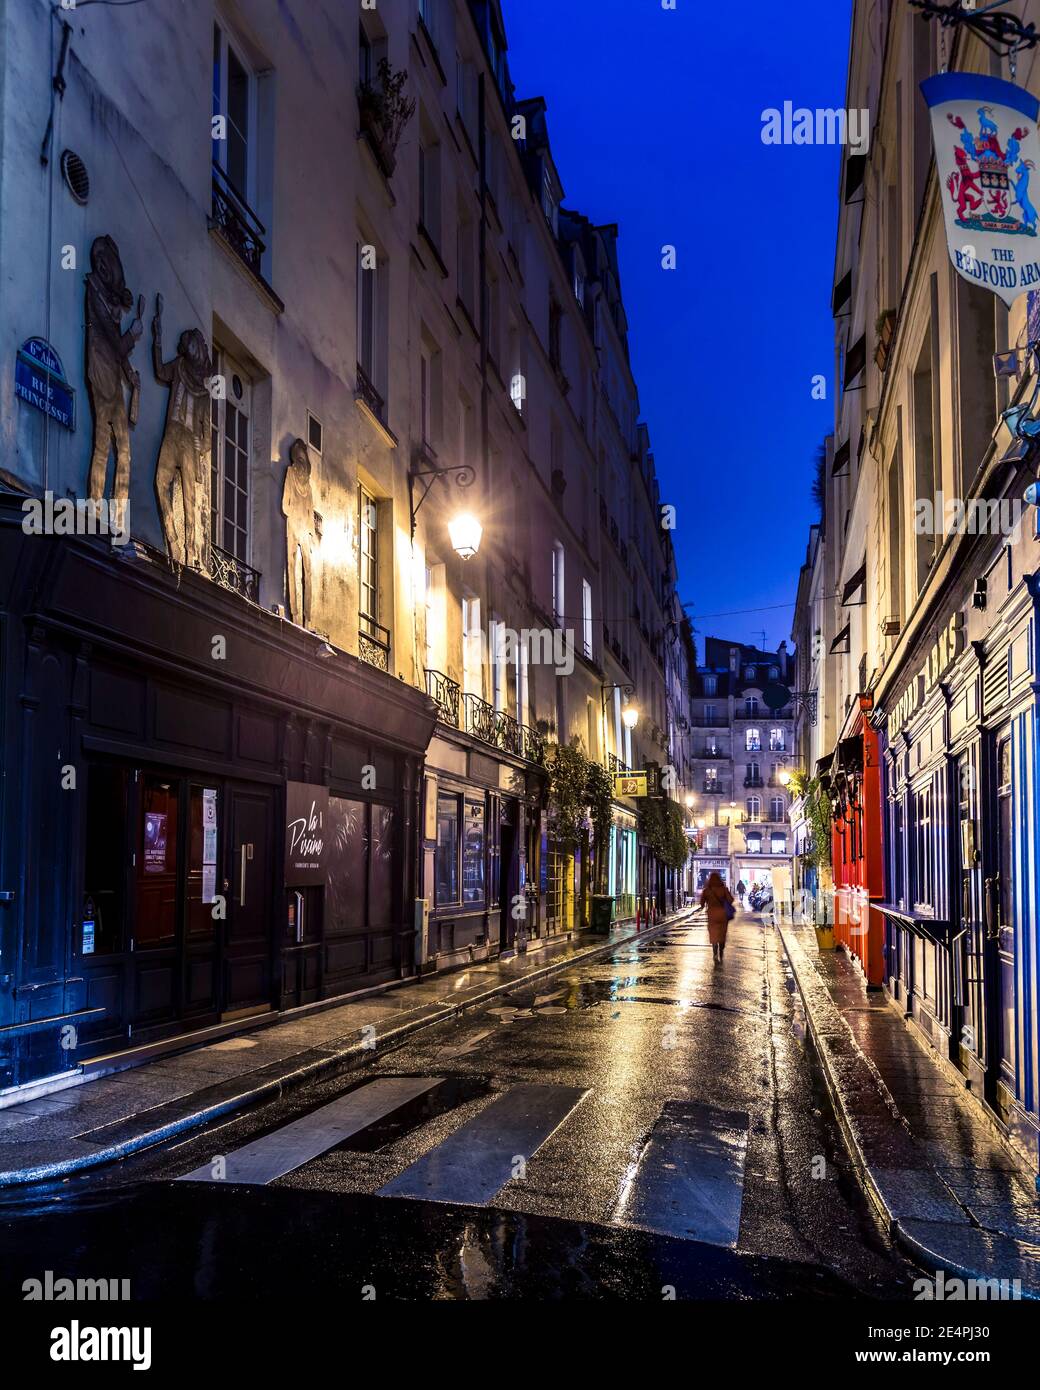 Paris, France - January 12, 2021: Empty  colorful street and bar closed due to covid19 restrictions in Paris, France Stock Photo